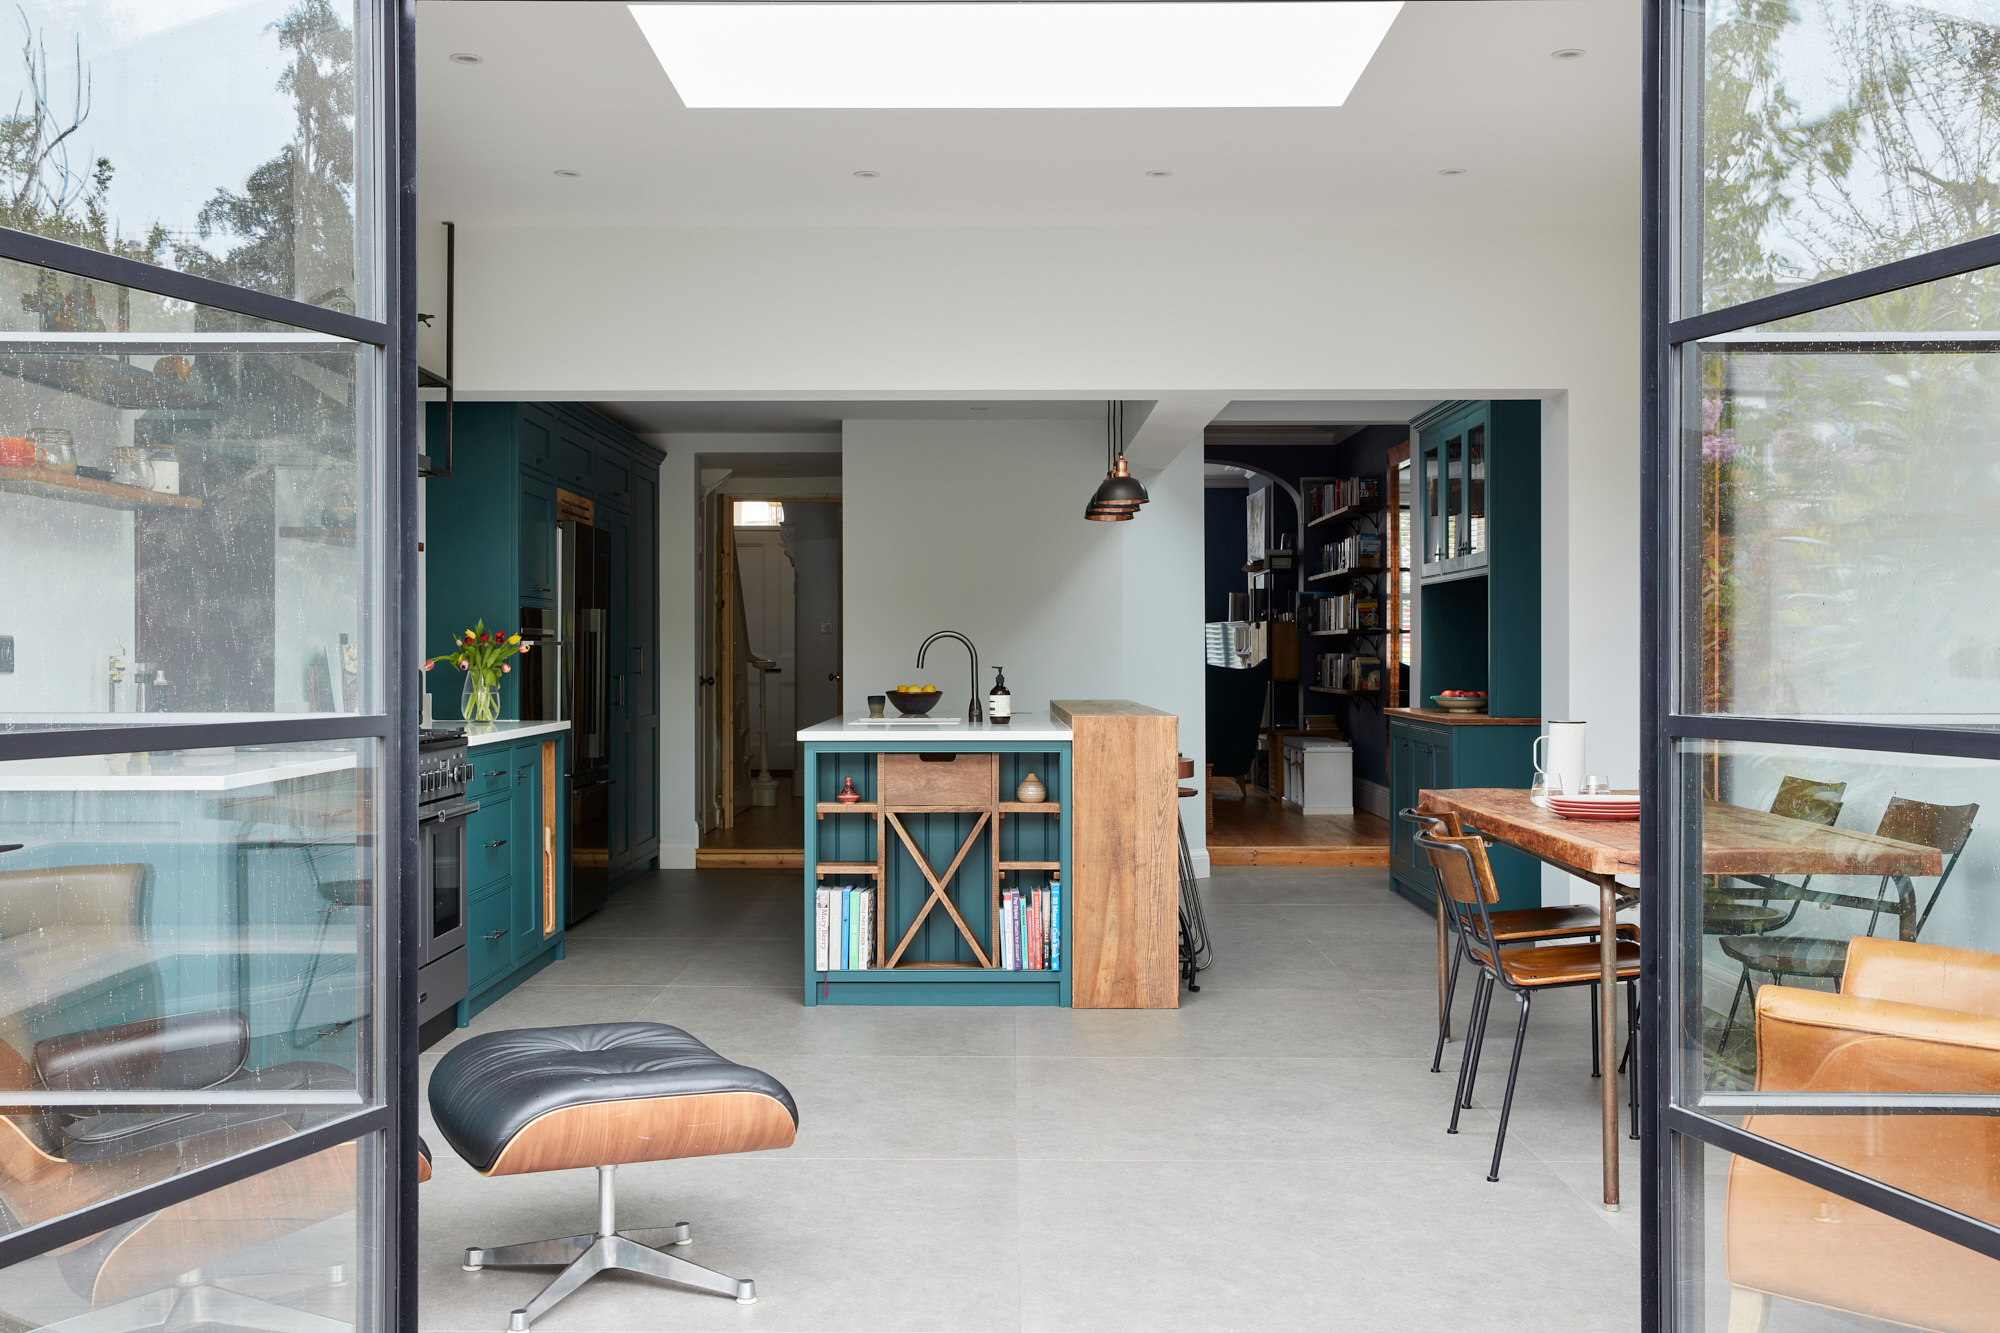 Crittall style doors with bespoke open plan industrial kitchen